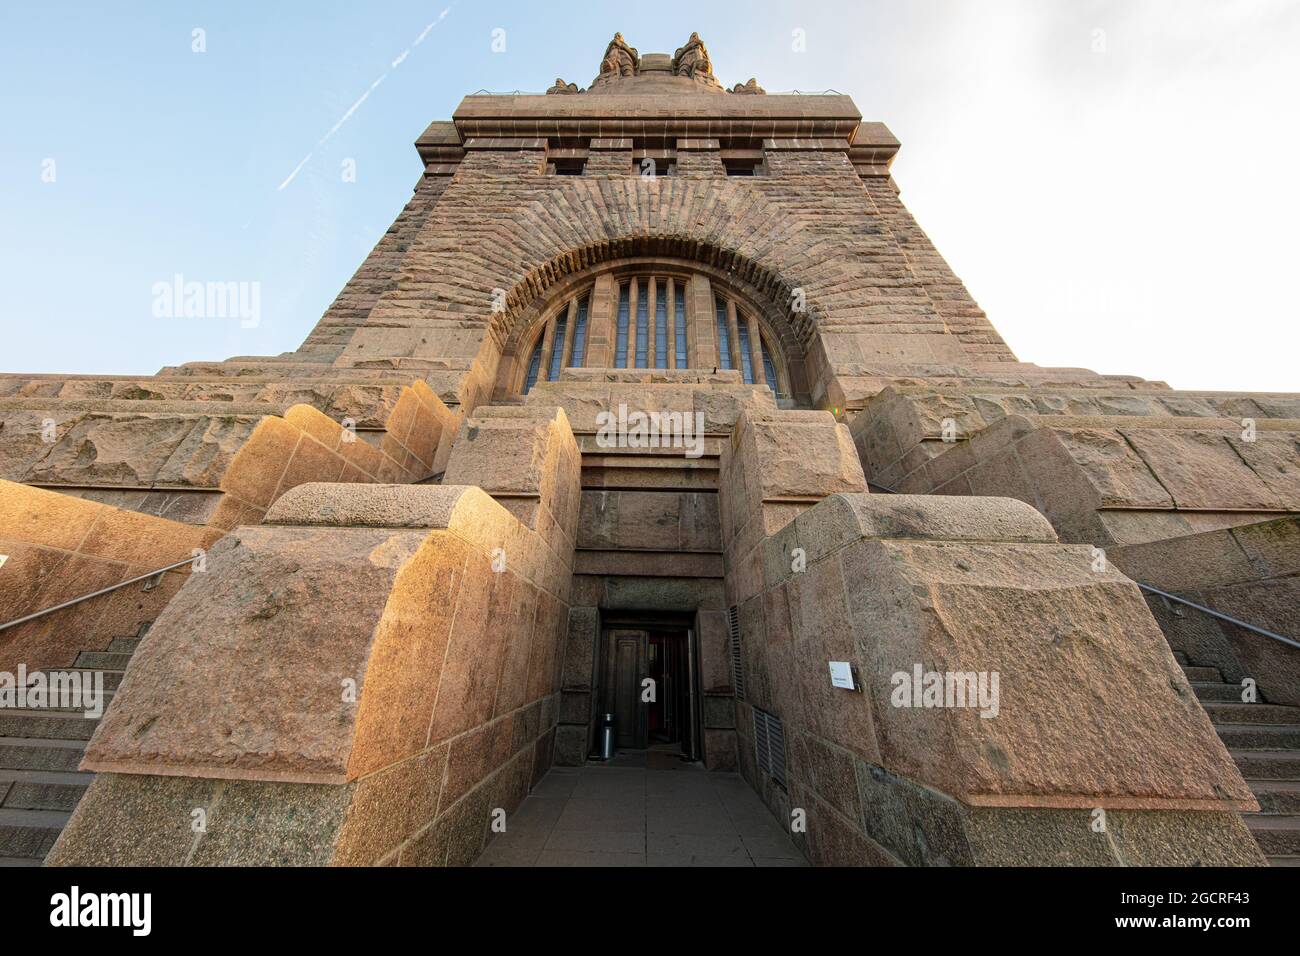 The entrance of the monument of the battle of nations at the city of Leipzig, Saxony, Germany. Wide Ange perspective of the historic building Stock Photo